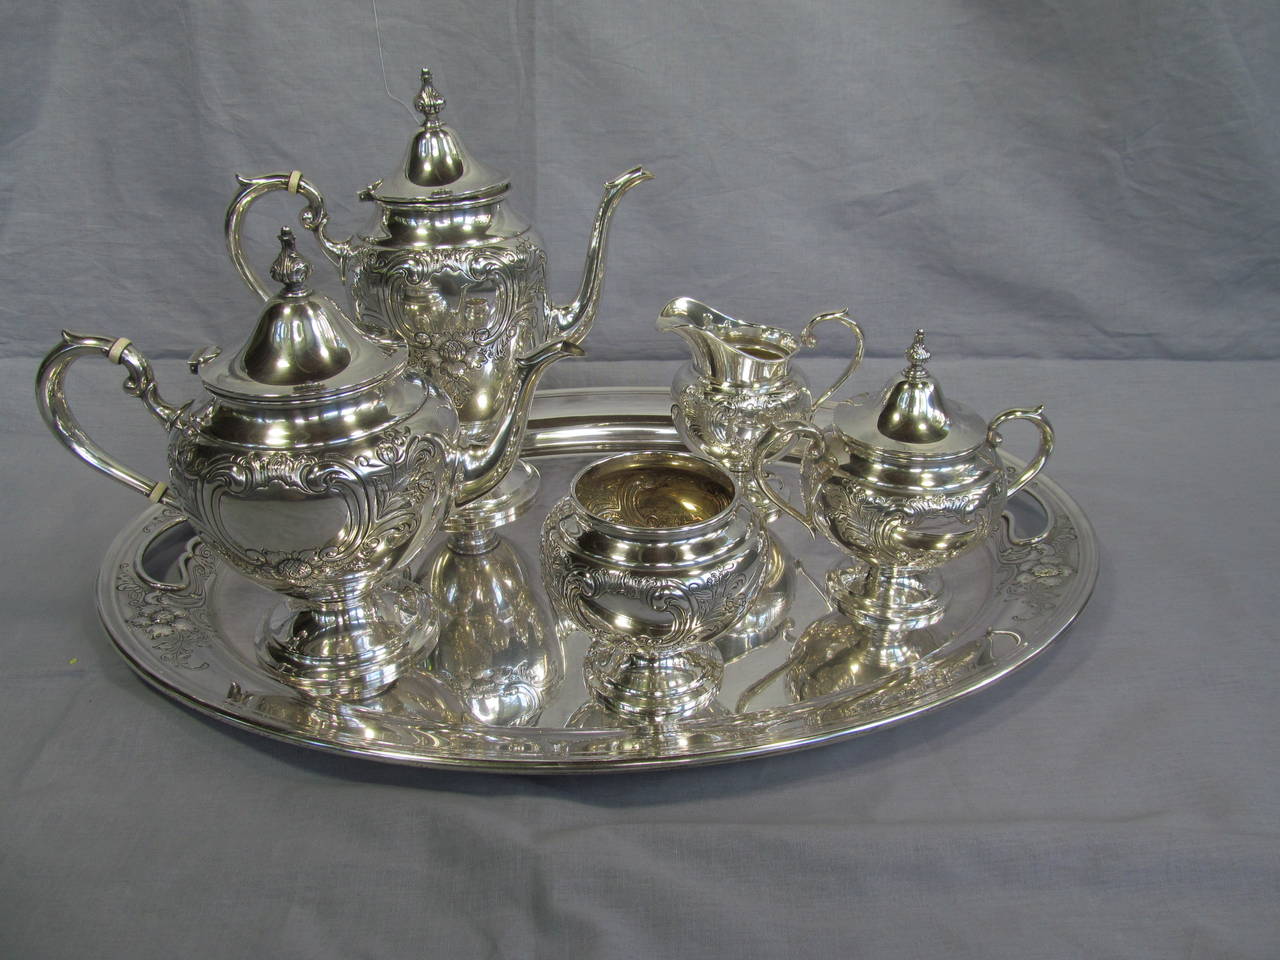 Six piece set including tray, coffee carafe, tea pot, cream pitcher, waste bowl and sugar bowl. Hand chased. 

Only hand polished. Some evident wear to gold wash interior. 

From the Estate of Mark Lee Kirk, Art Director at 20th Century Fox in